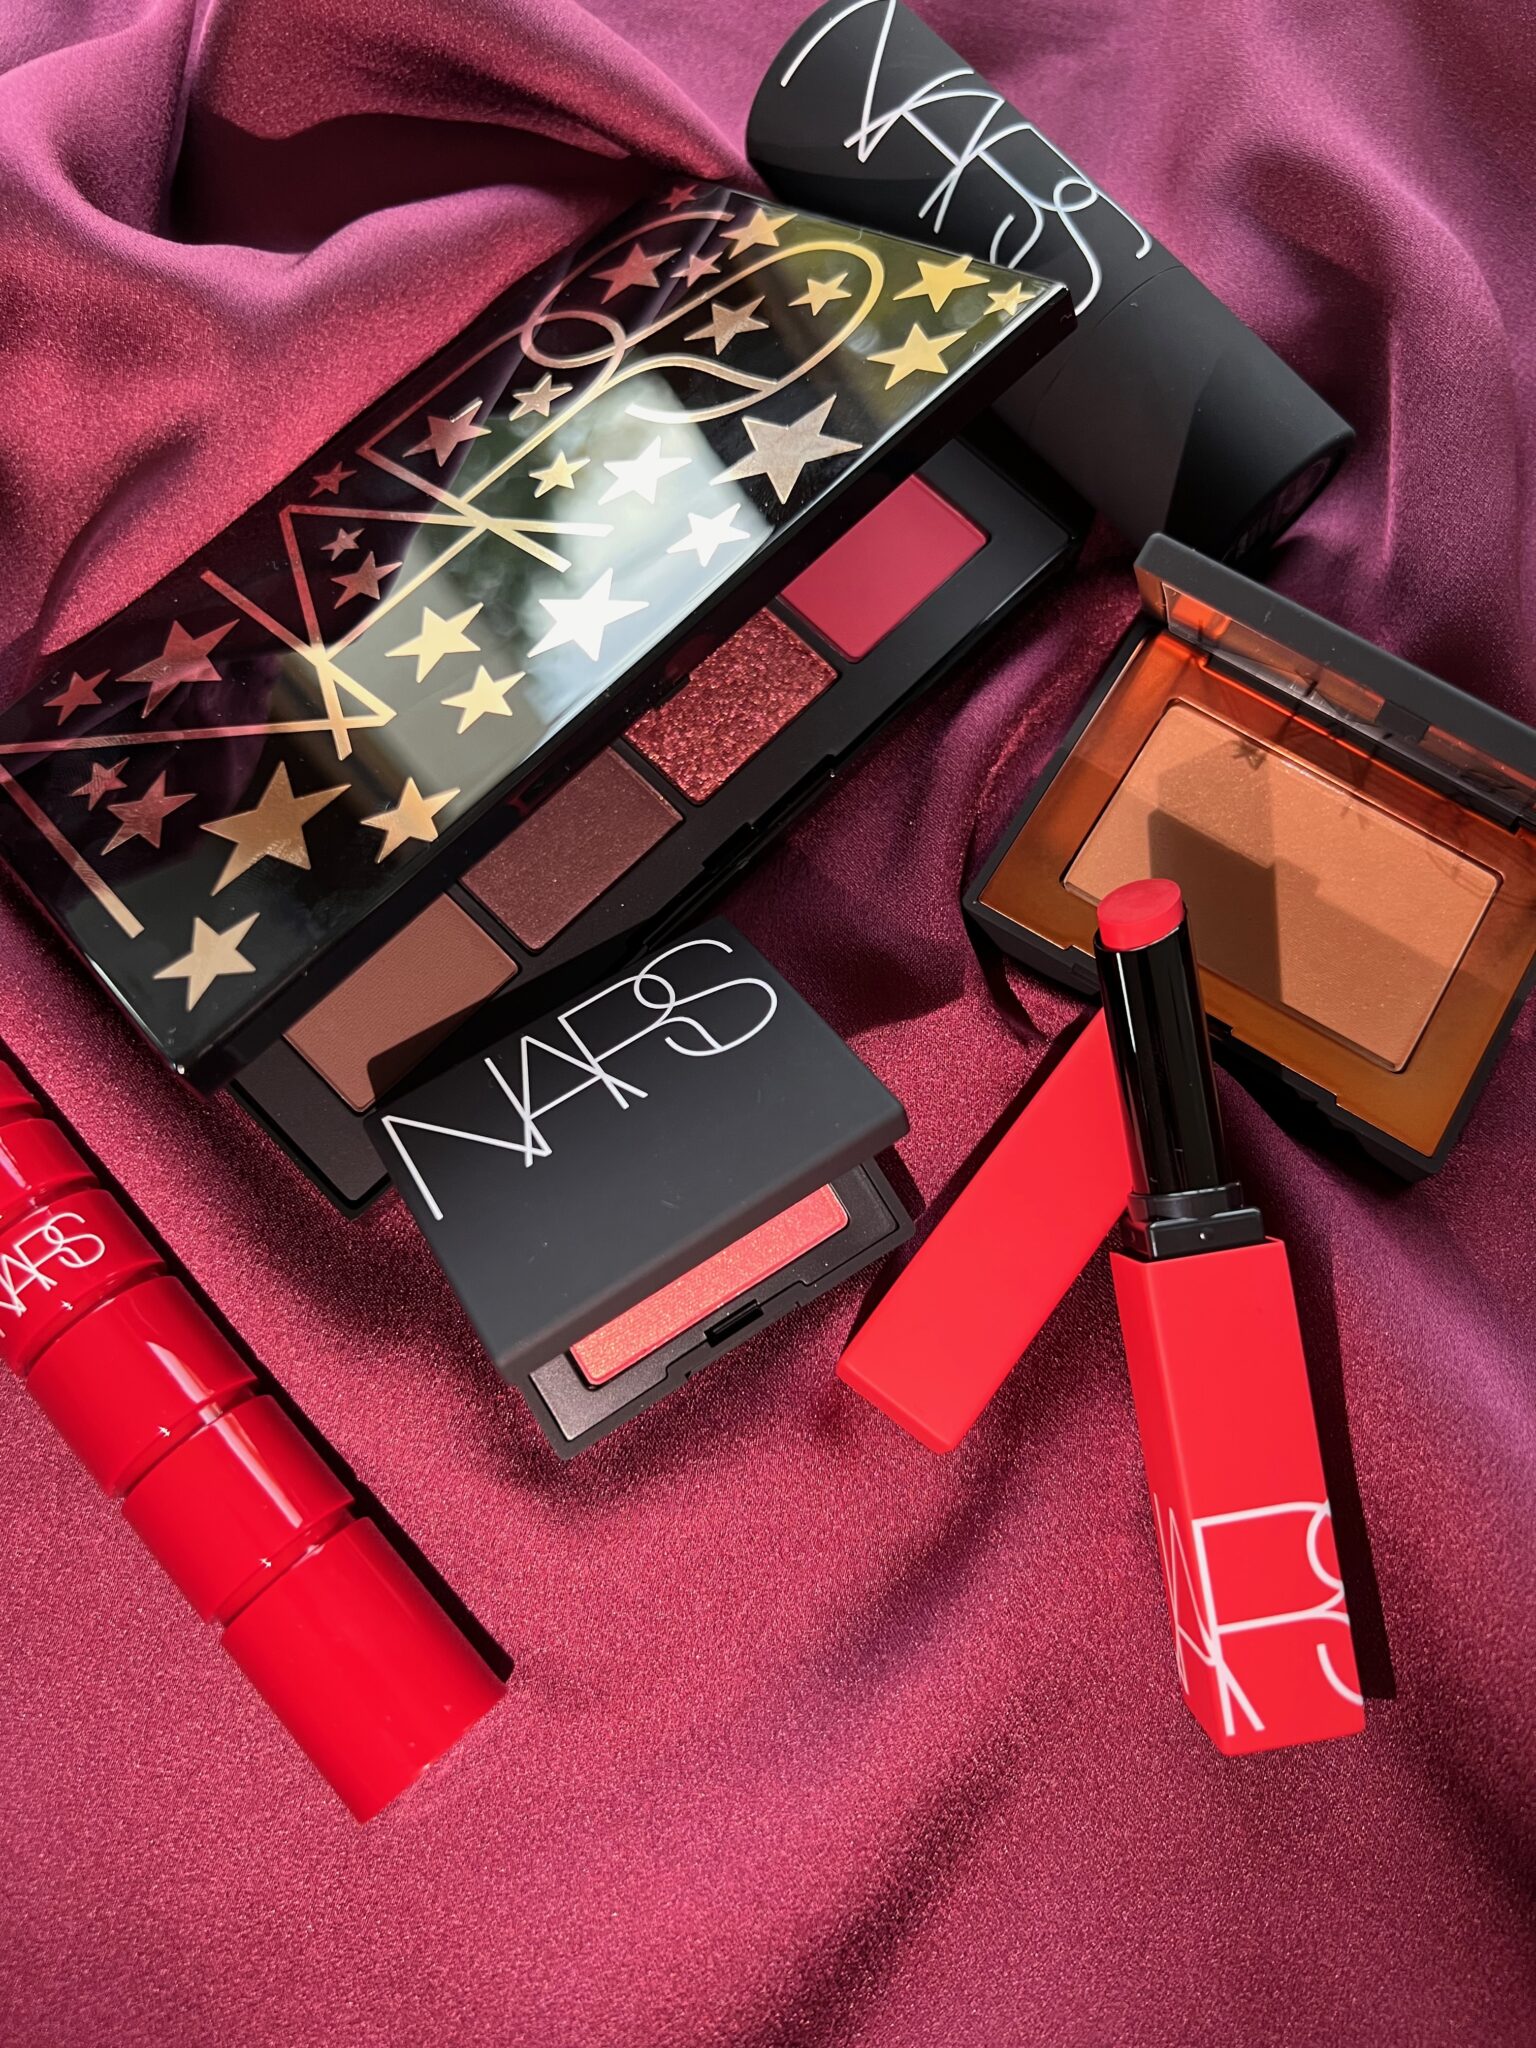 Christmas at Sephora - Top Holiday 2022 Gift Sets For Women. Nars, Sephora, Benefit and more. 7